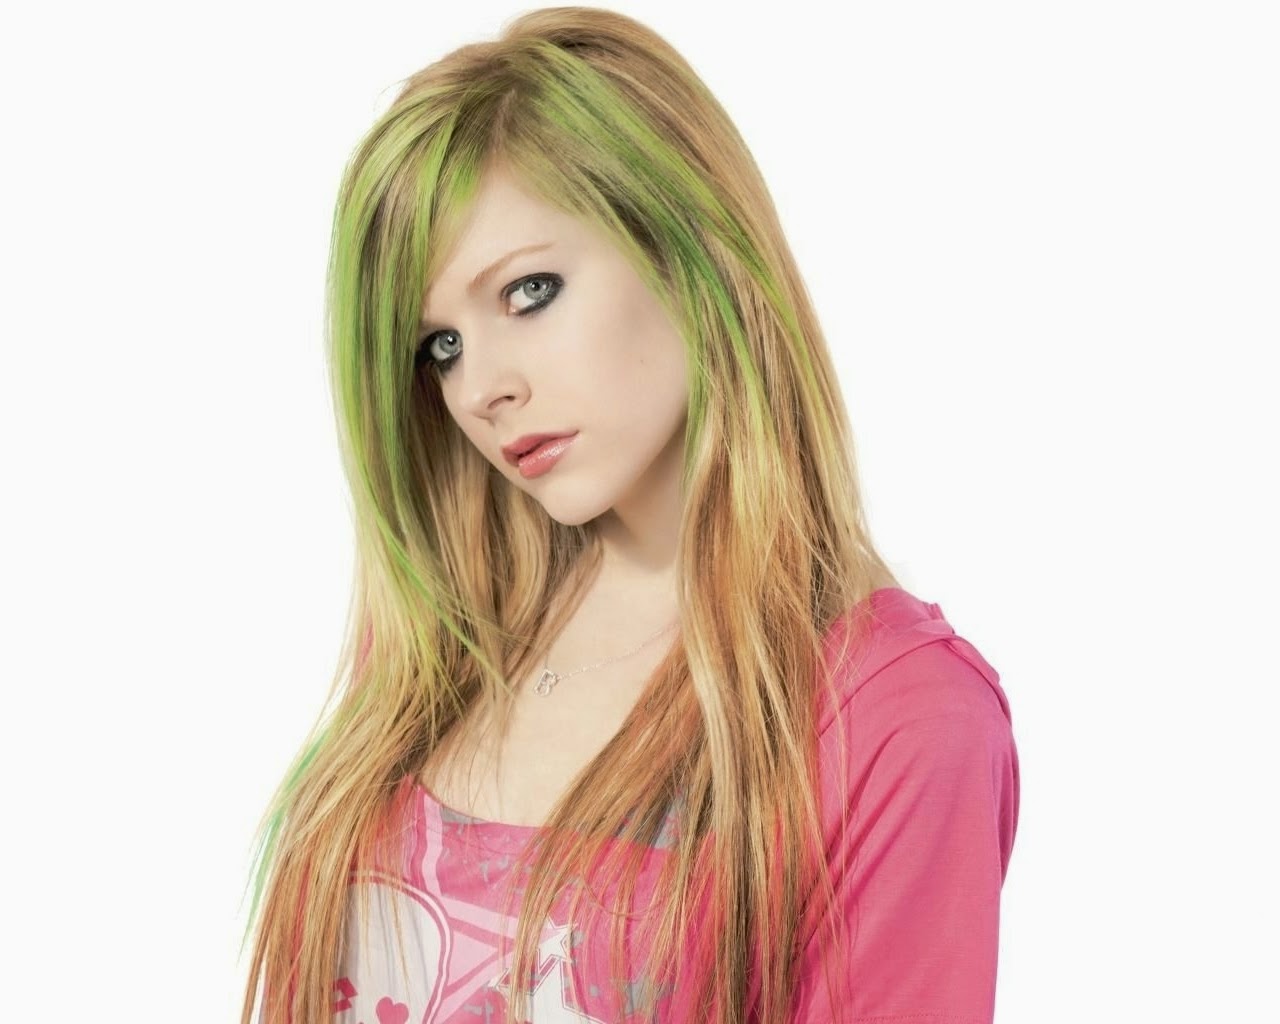 avril lavigne hairstyles avril lavigne hairstyles over the years avril